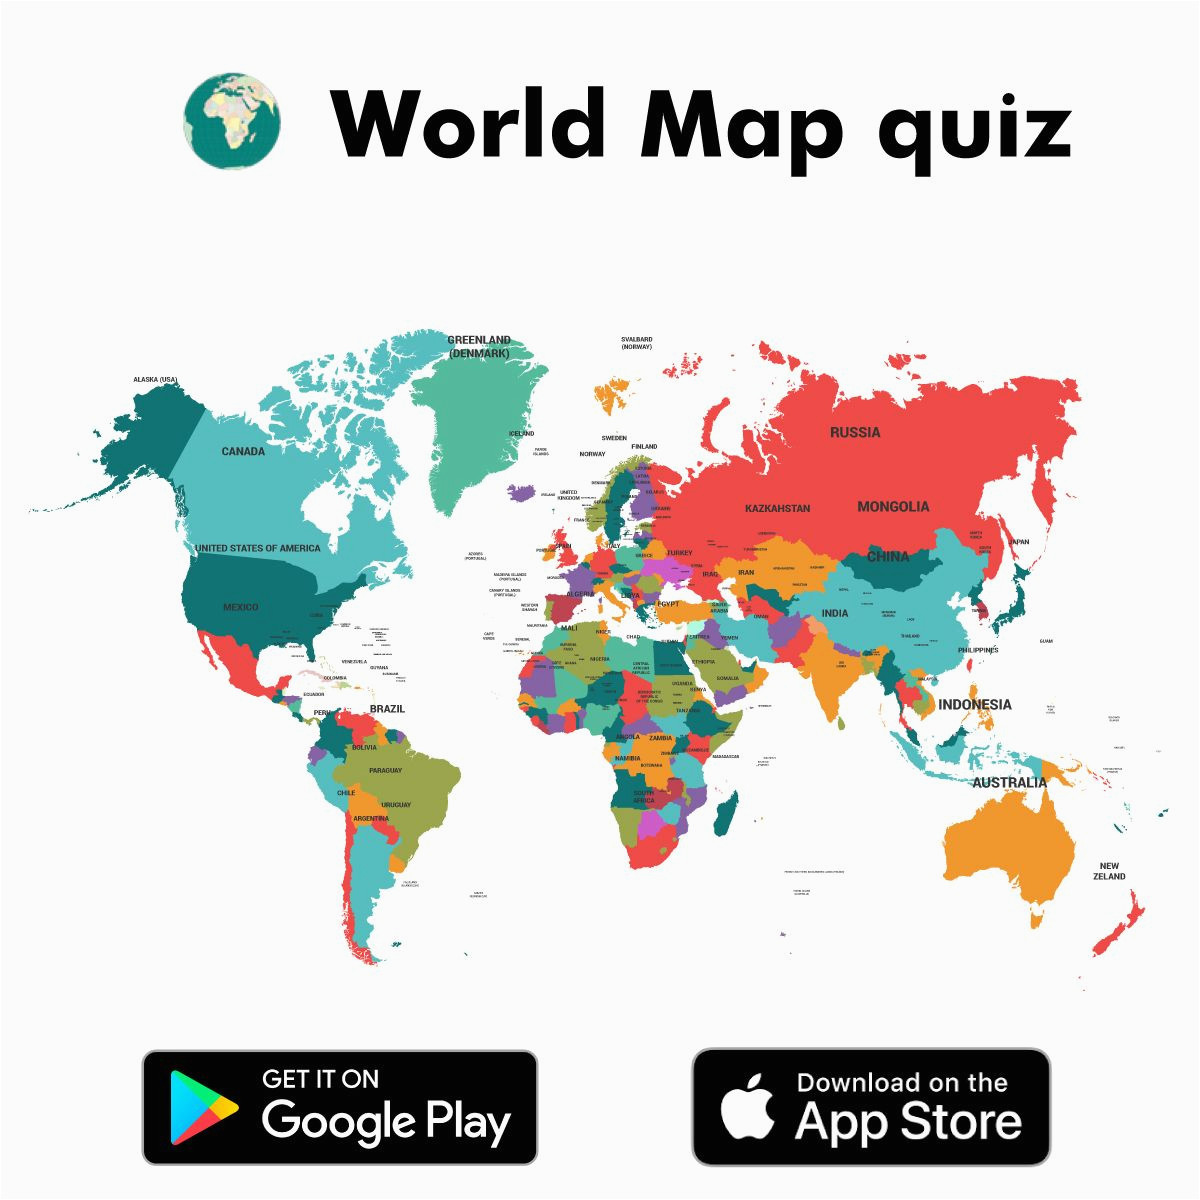 world map quiz app is an interesting app developed for kids that